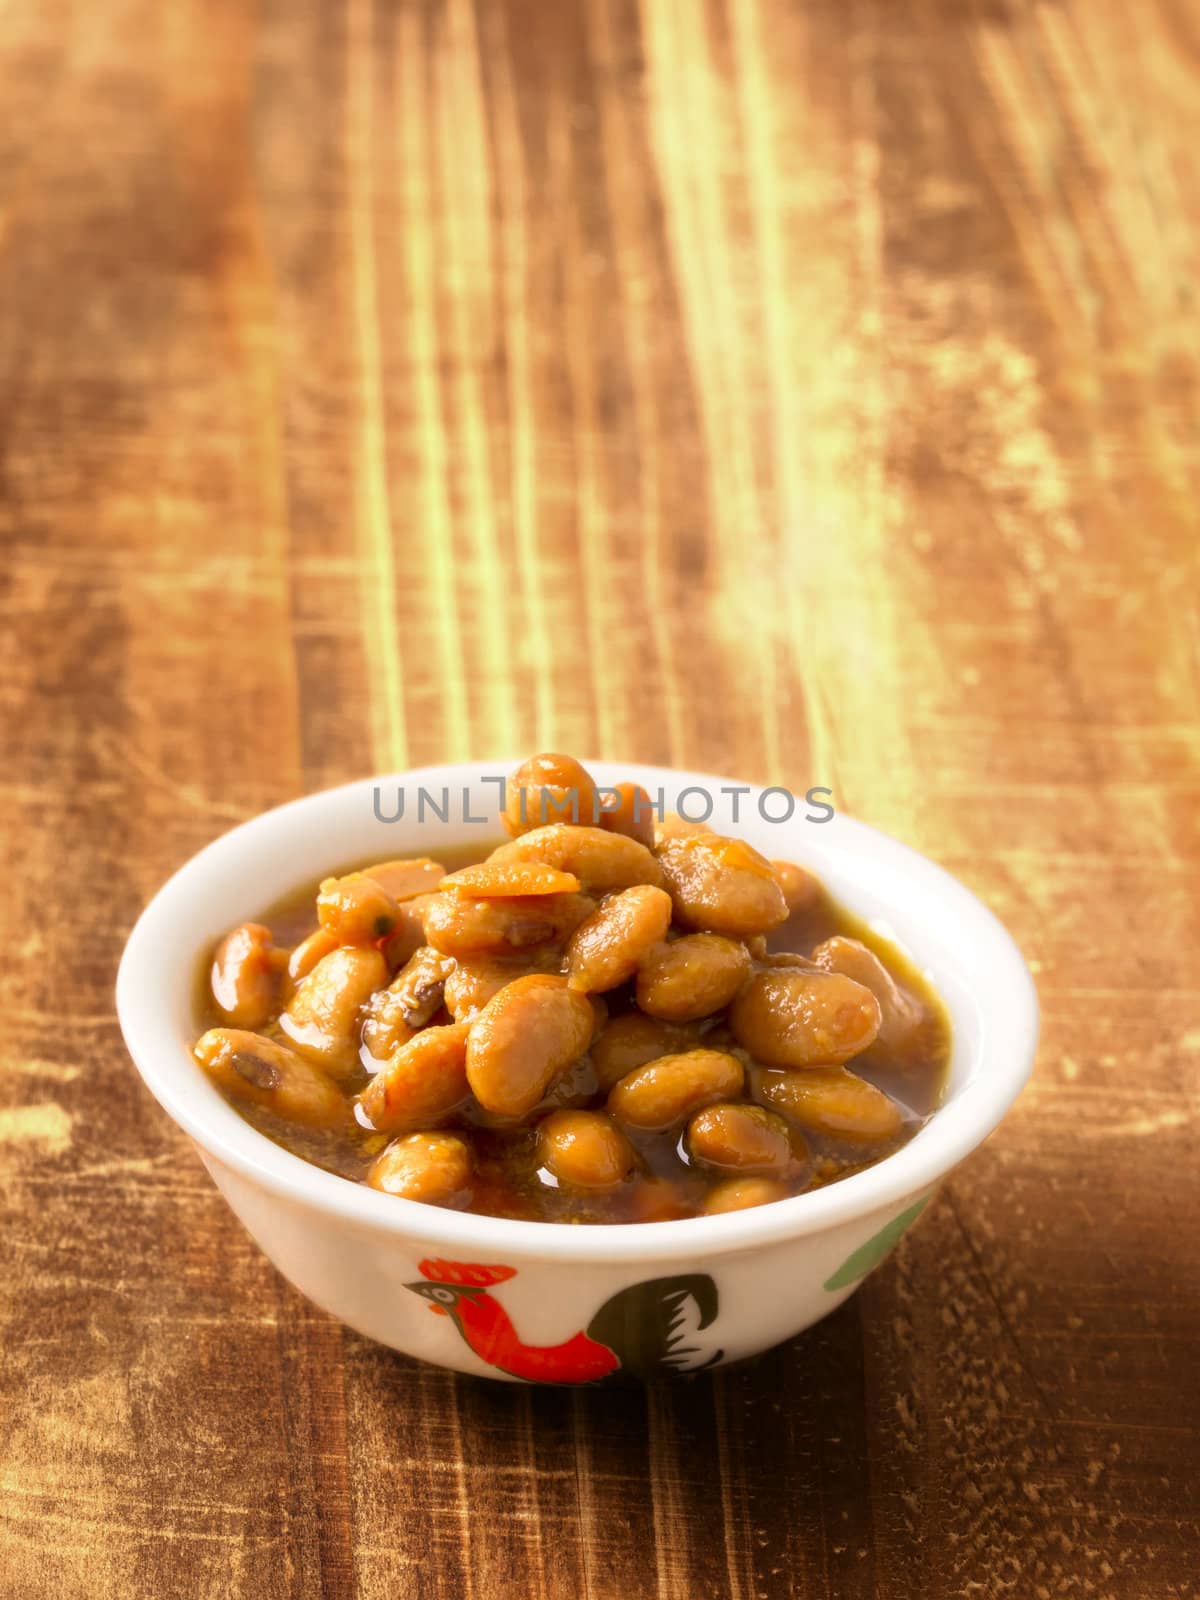 salted fermented soy beans by zkruger